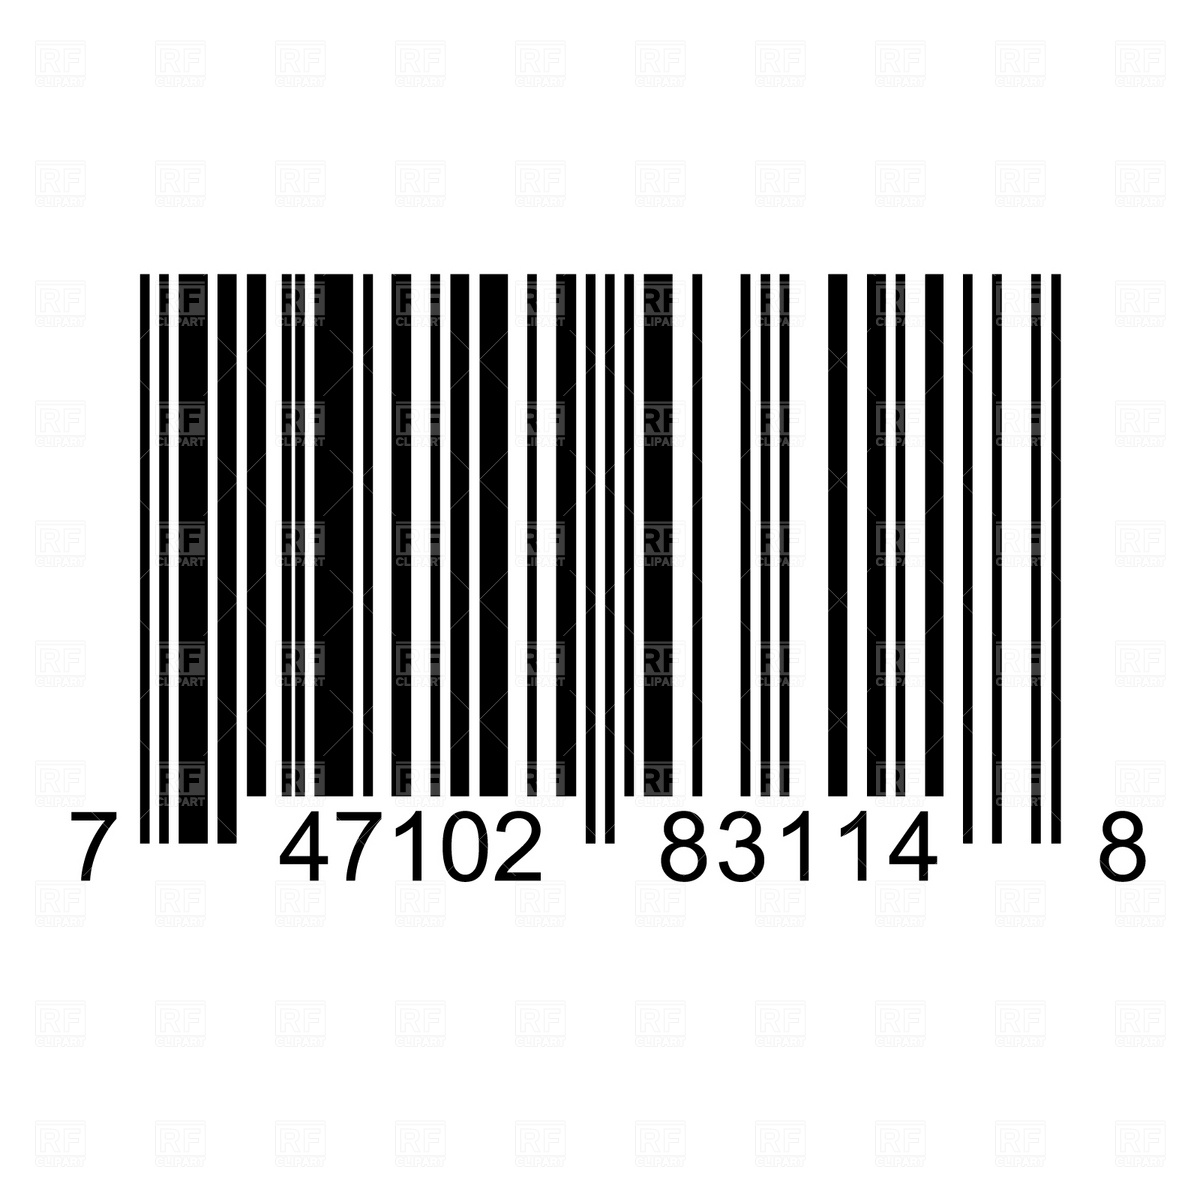 Download Barcode Vector Free at GetDrawings | Free download